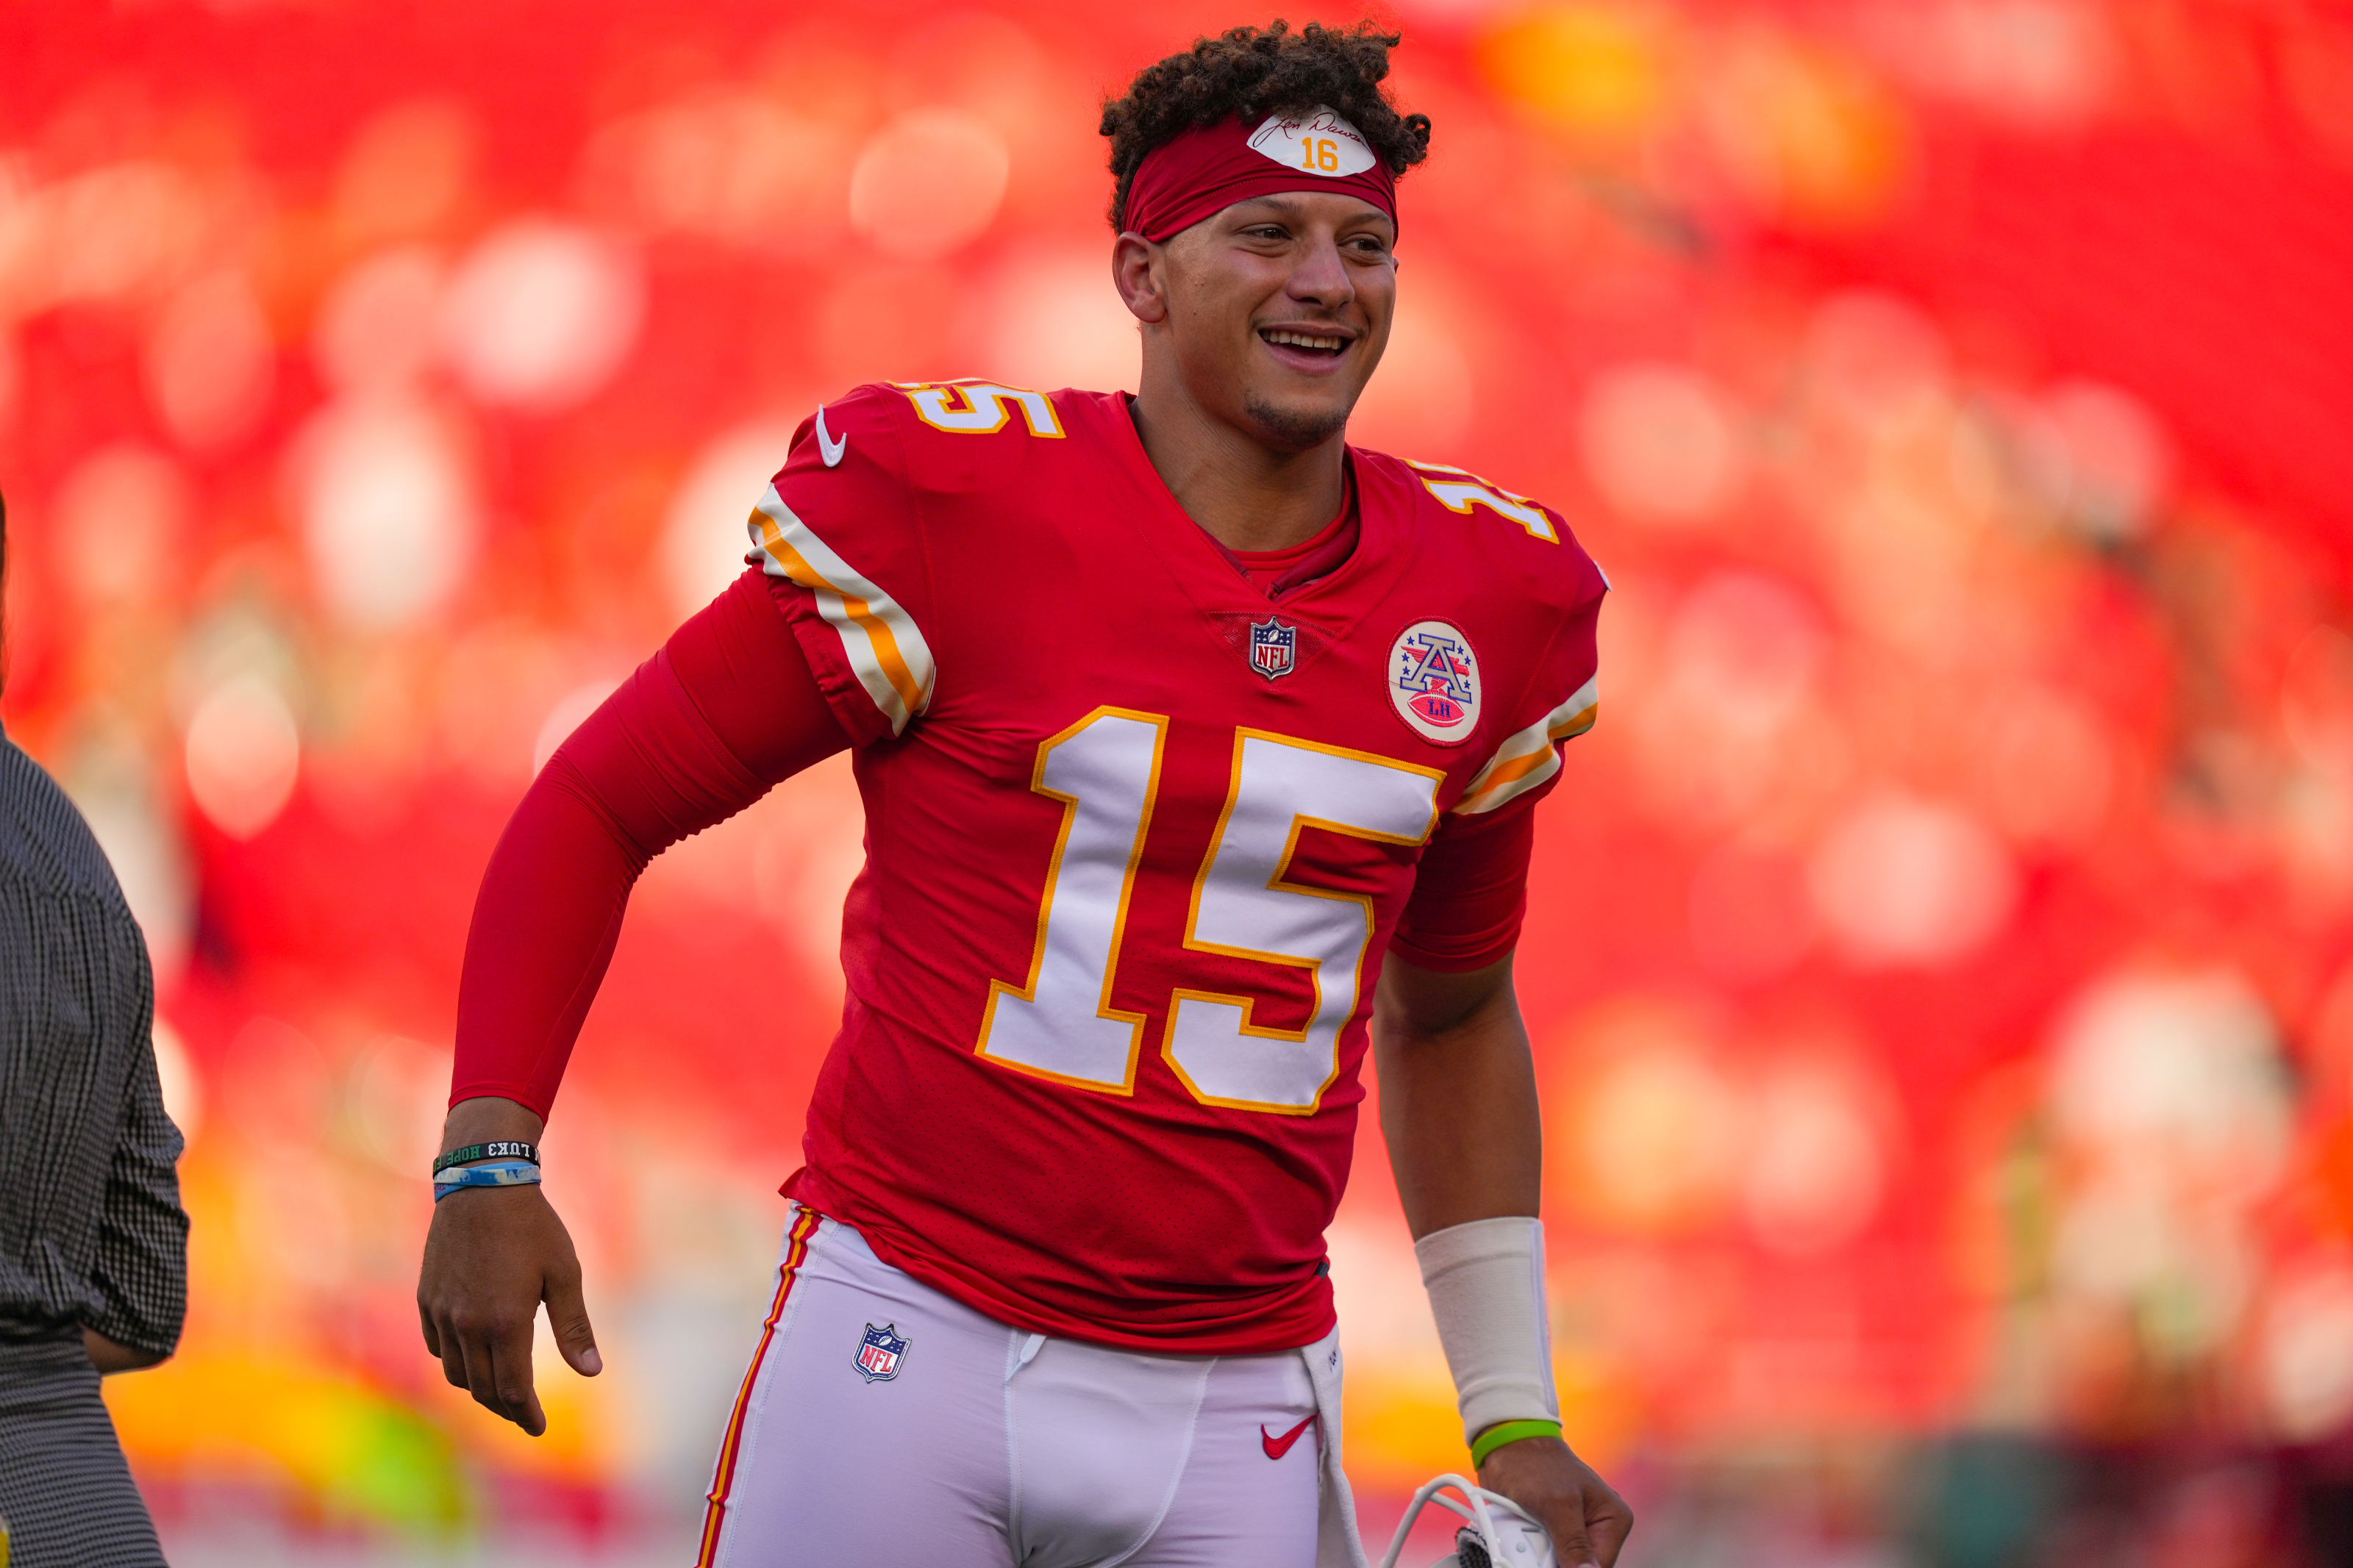 Three Chiefs ranked top in NFL per player grading system